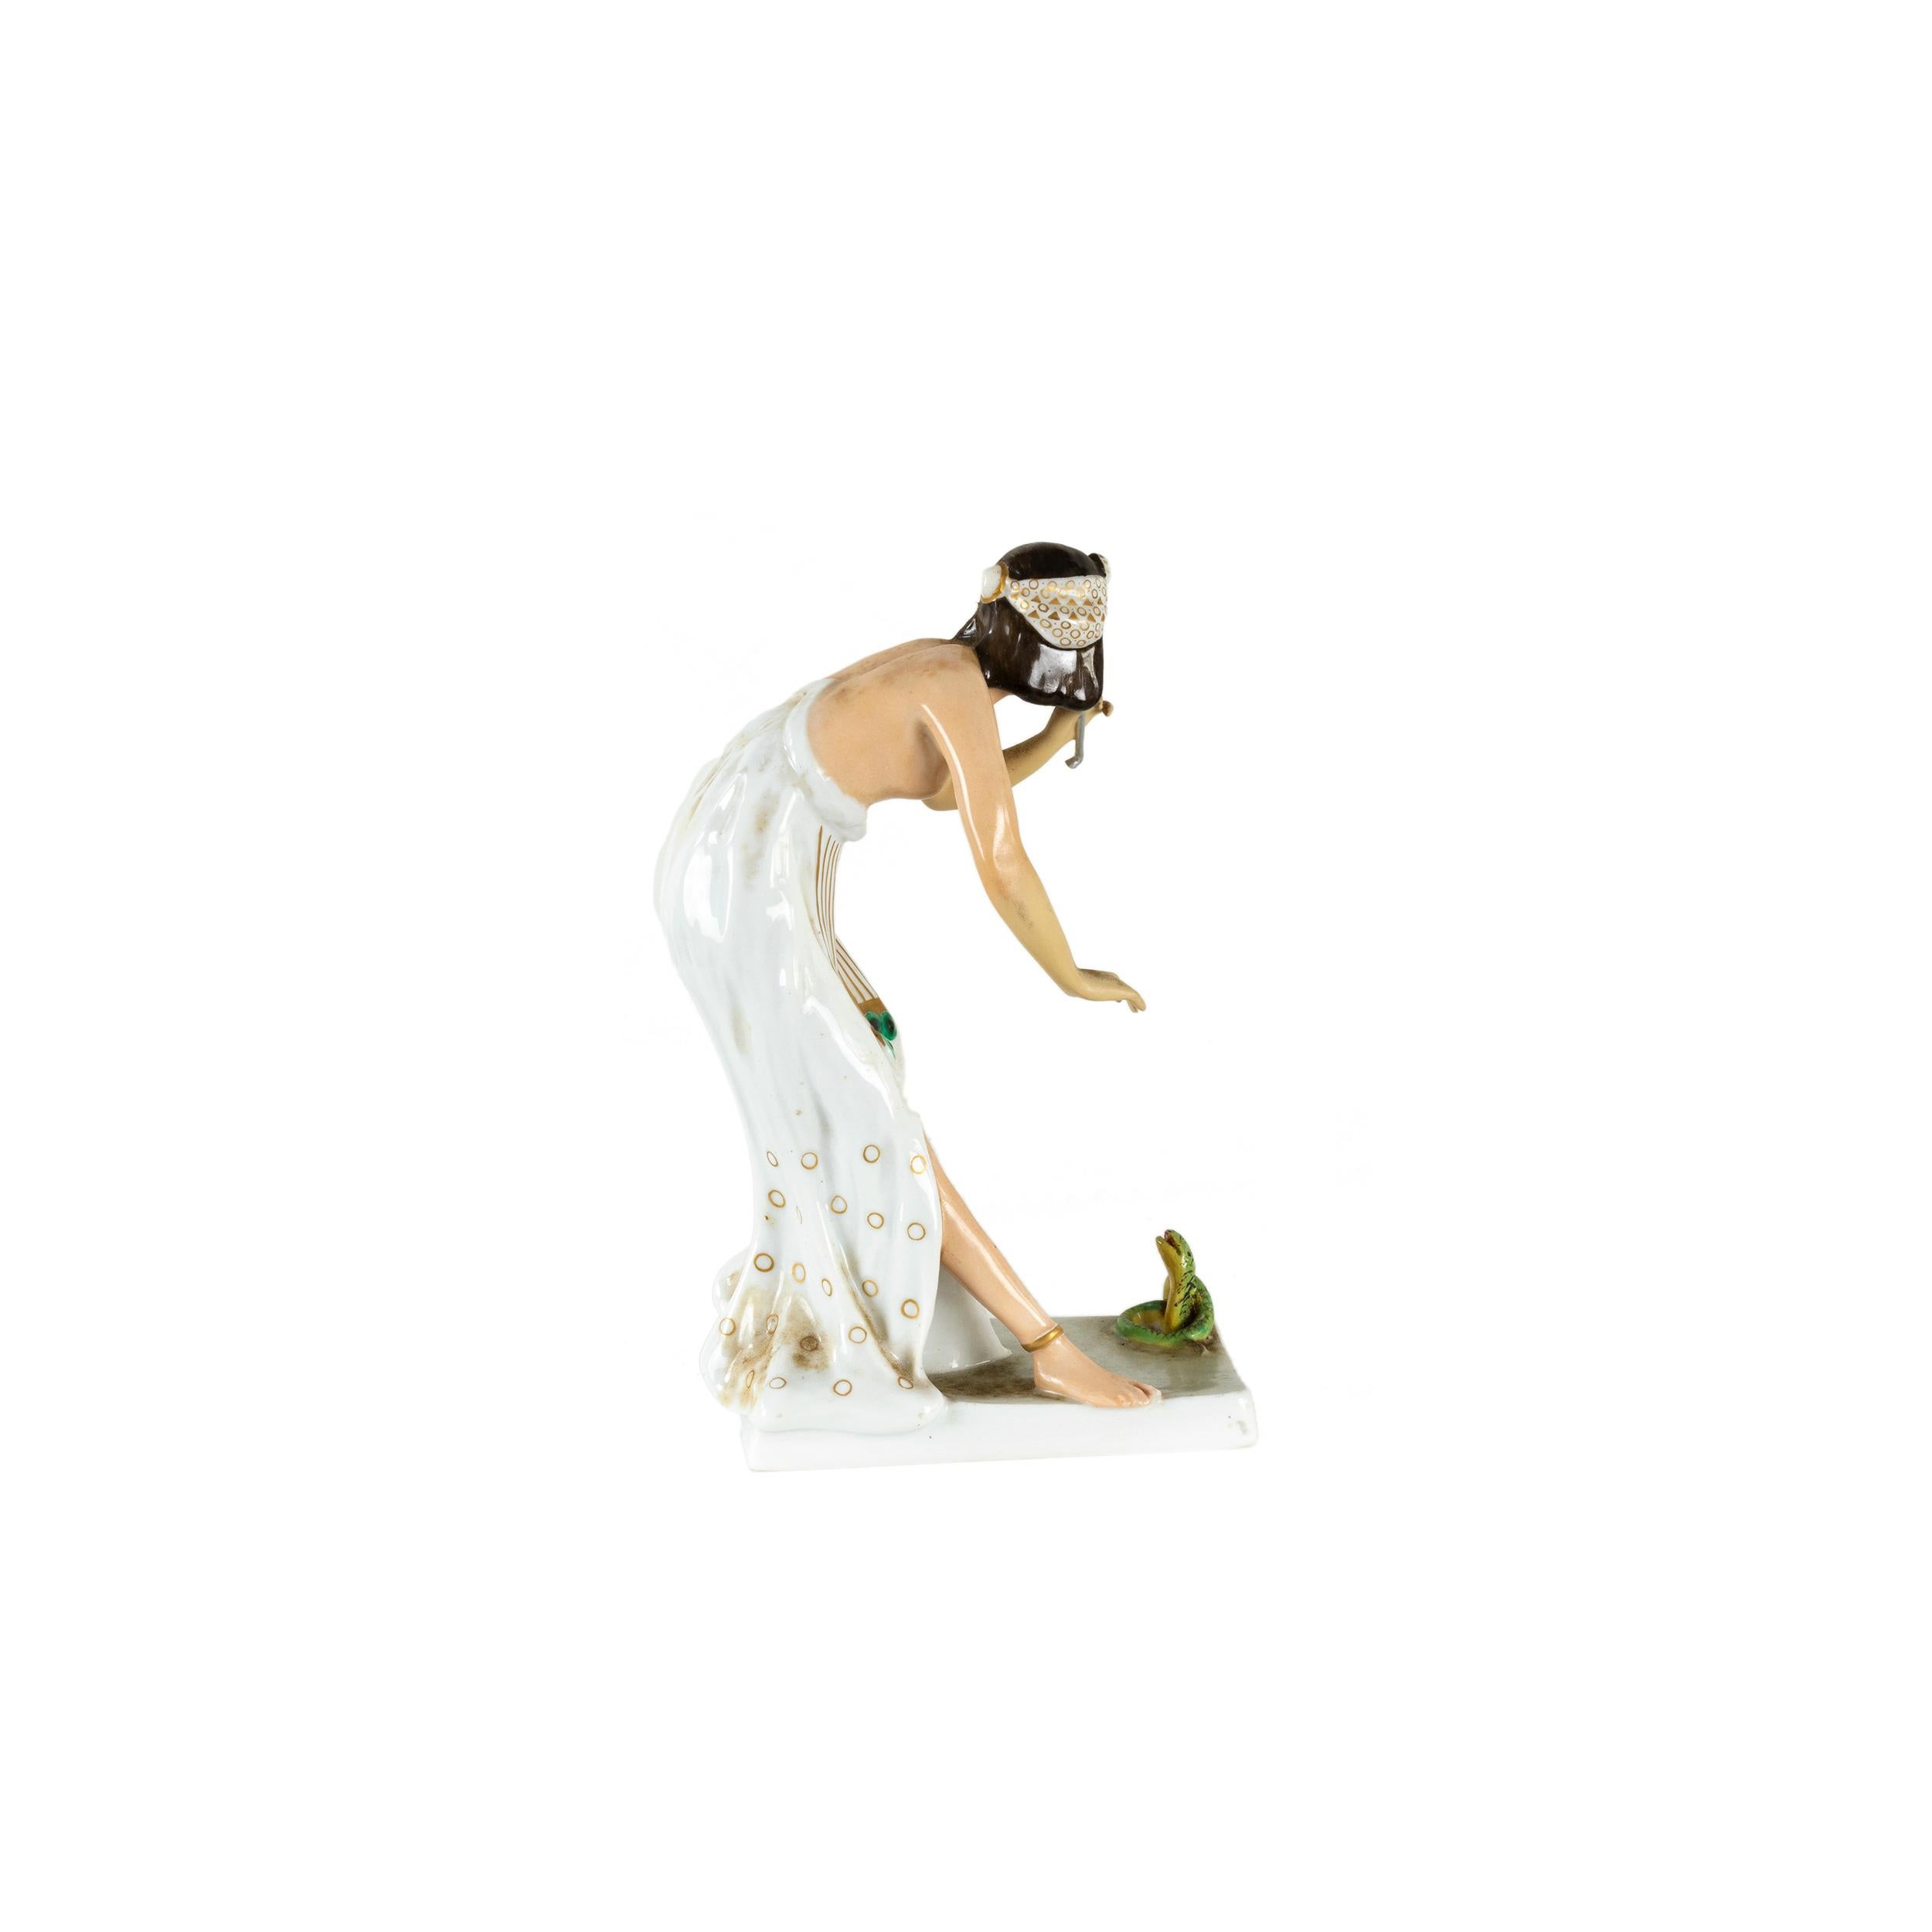 A Rosenthal porcelain figure of a snake charmer, after model by Berthold Boesz, pattern nr K442. 
Bibelot in the shape of an Egyptian-style woman, enchanting a small snake on a rectangular base.
“Philipp Rosenthal” signed and “12” mark. 
Brand